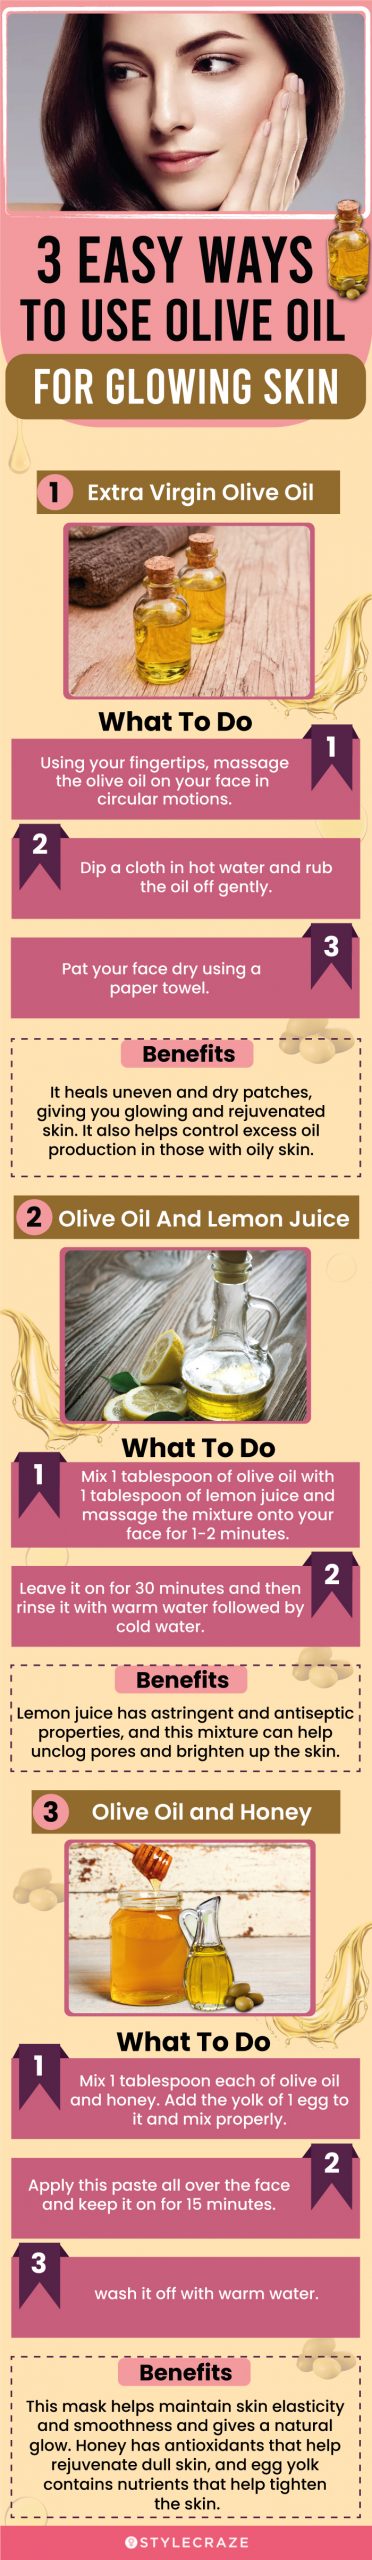 How To Use Olive Oil To Get Glowing Skin? picture